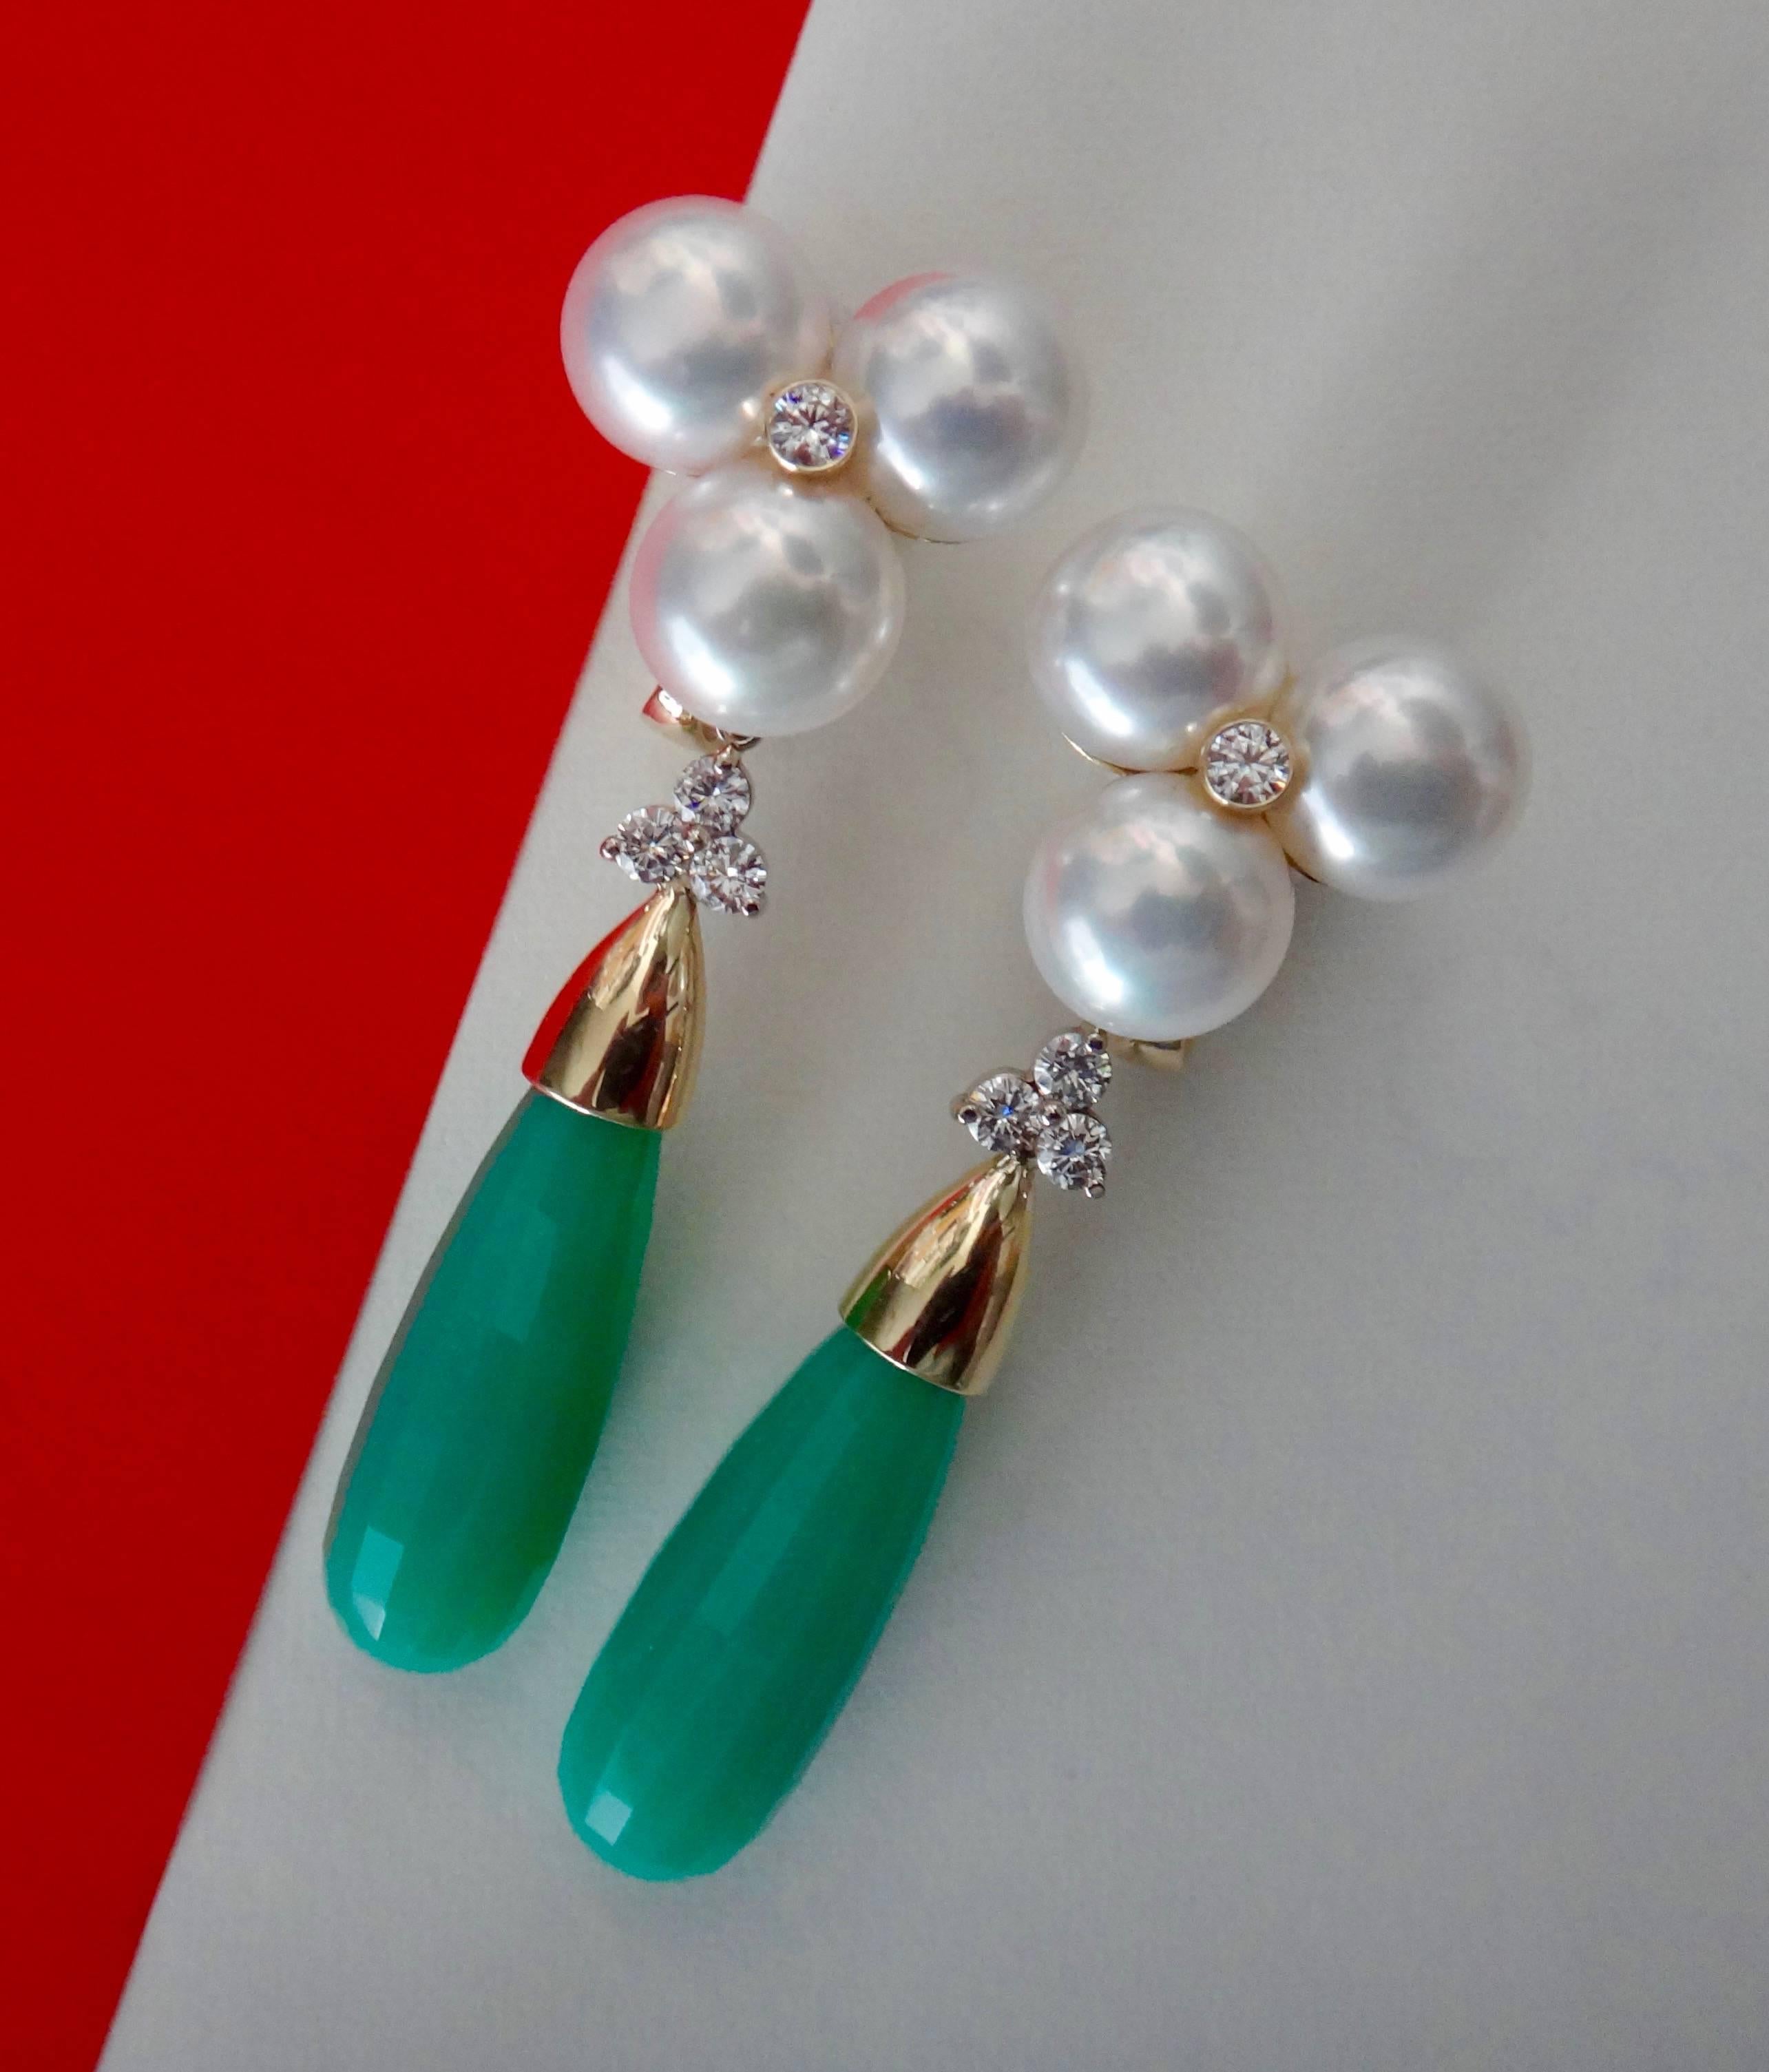 A cluster of three white pearls decorated with bezel set diamonds are the foundation for a large and long pair of faceted chrysoprase briolette drops.  The diamond and briolette drops are removalbe making these very versatile earrings.  All set in